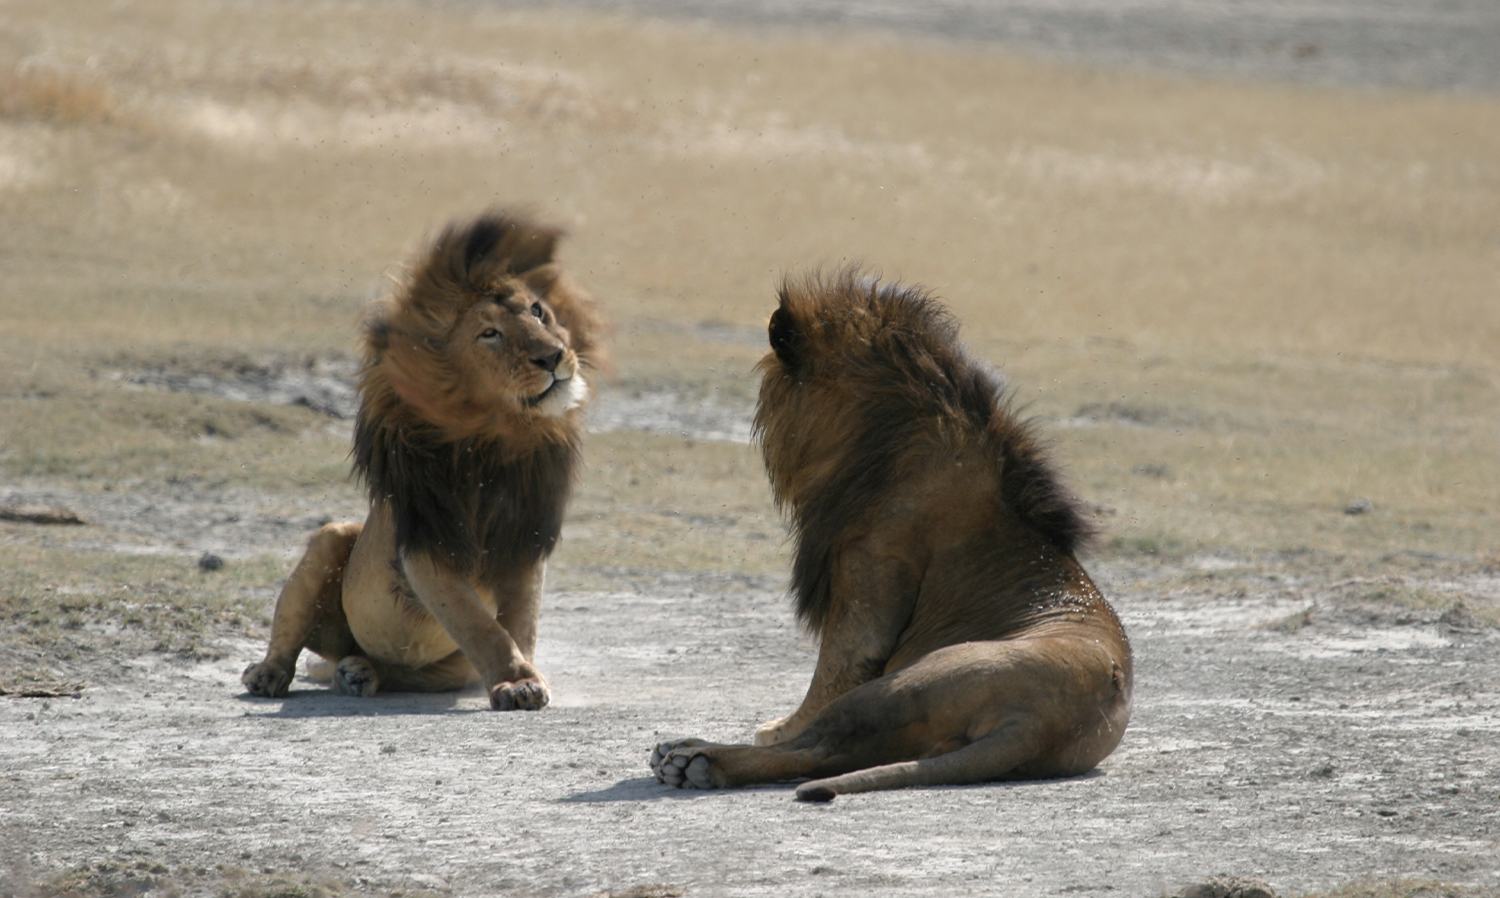 Lions in the Ngorogoro Crater